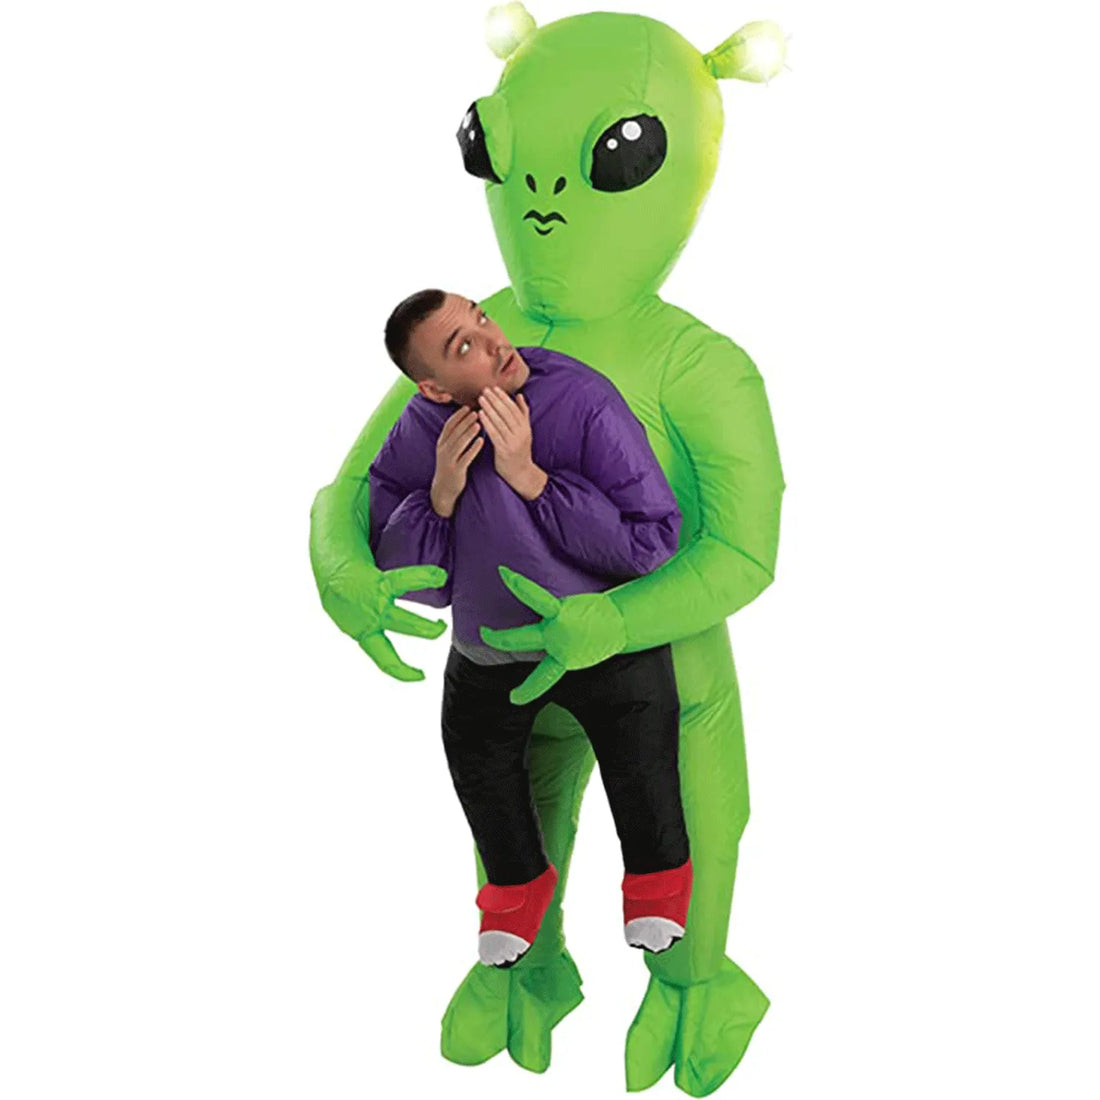 Benefits of Adult Inflatable Costume: Adding Fun and Whimsy to Any Occasion